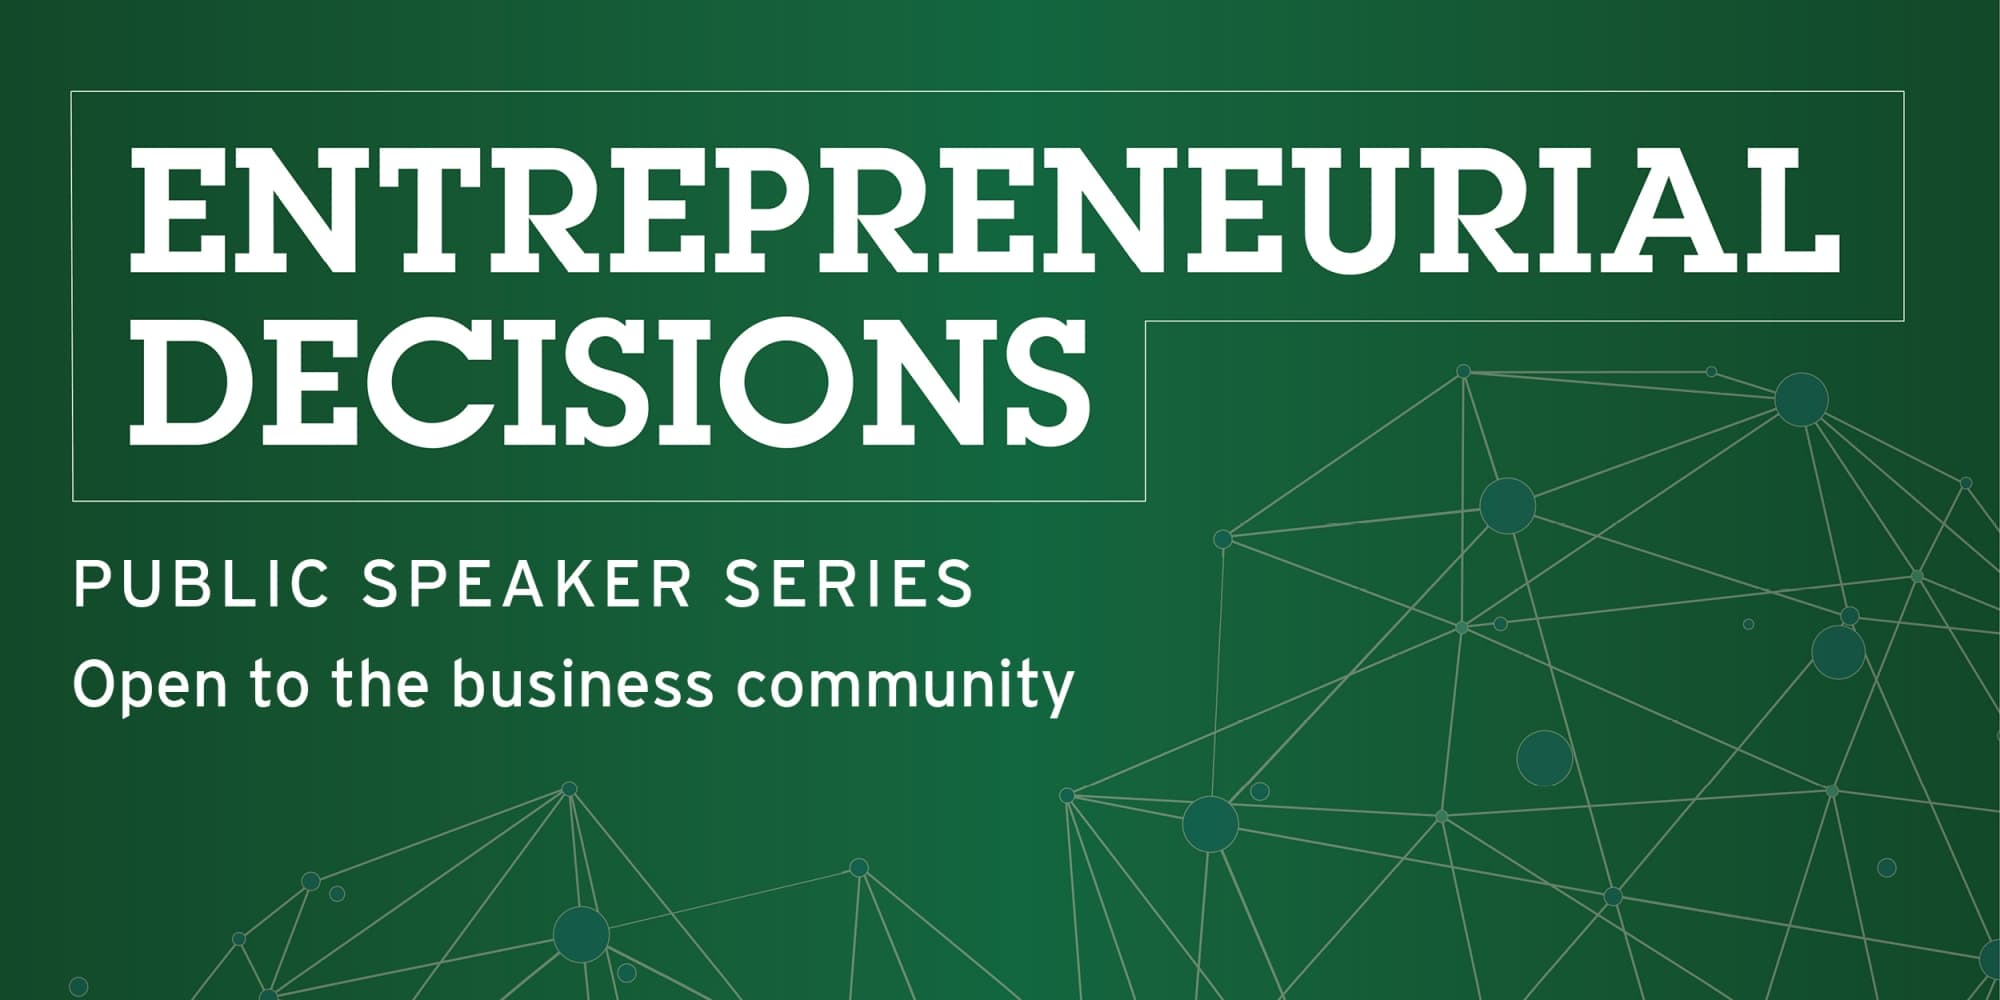 Entreprenuerial Decisions public speaker series open to the business community